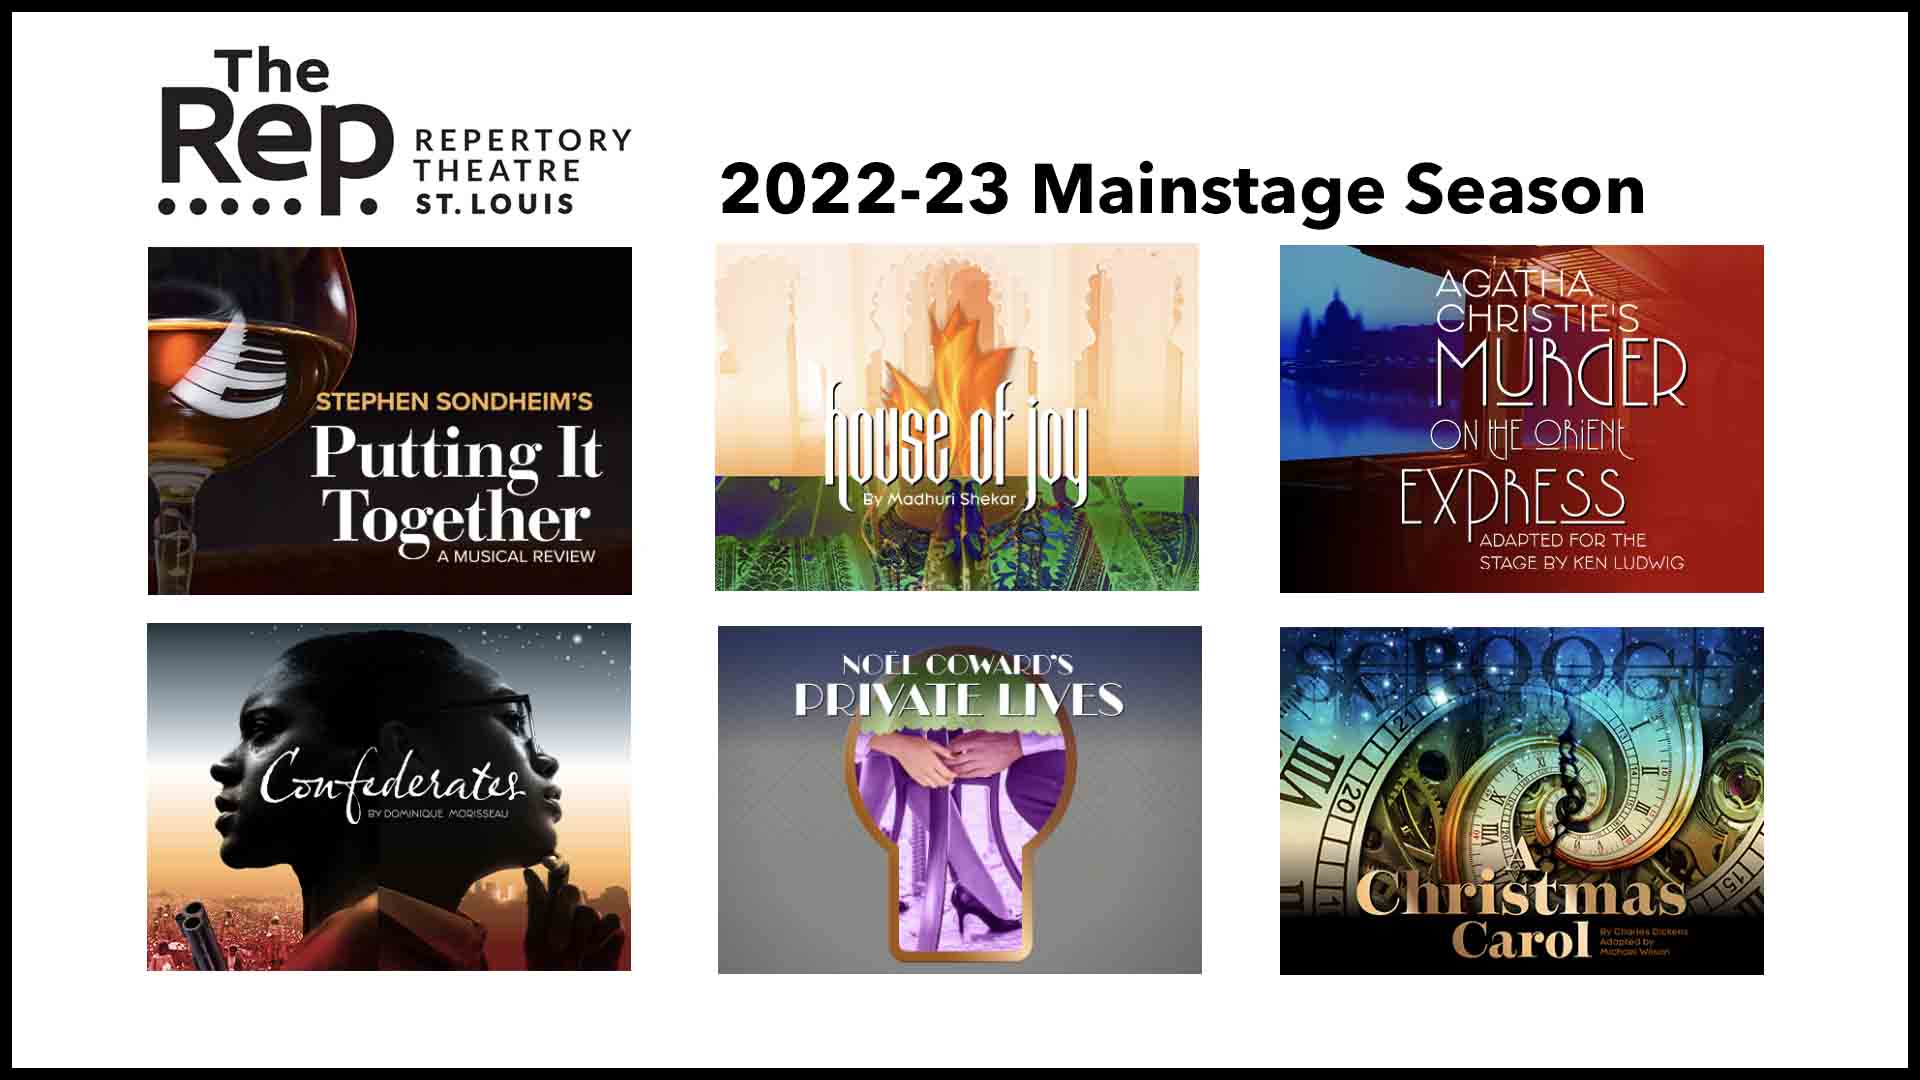 St. Louis Rep Announces Its 2022-2023 Season Starting In August